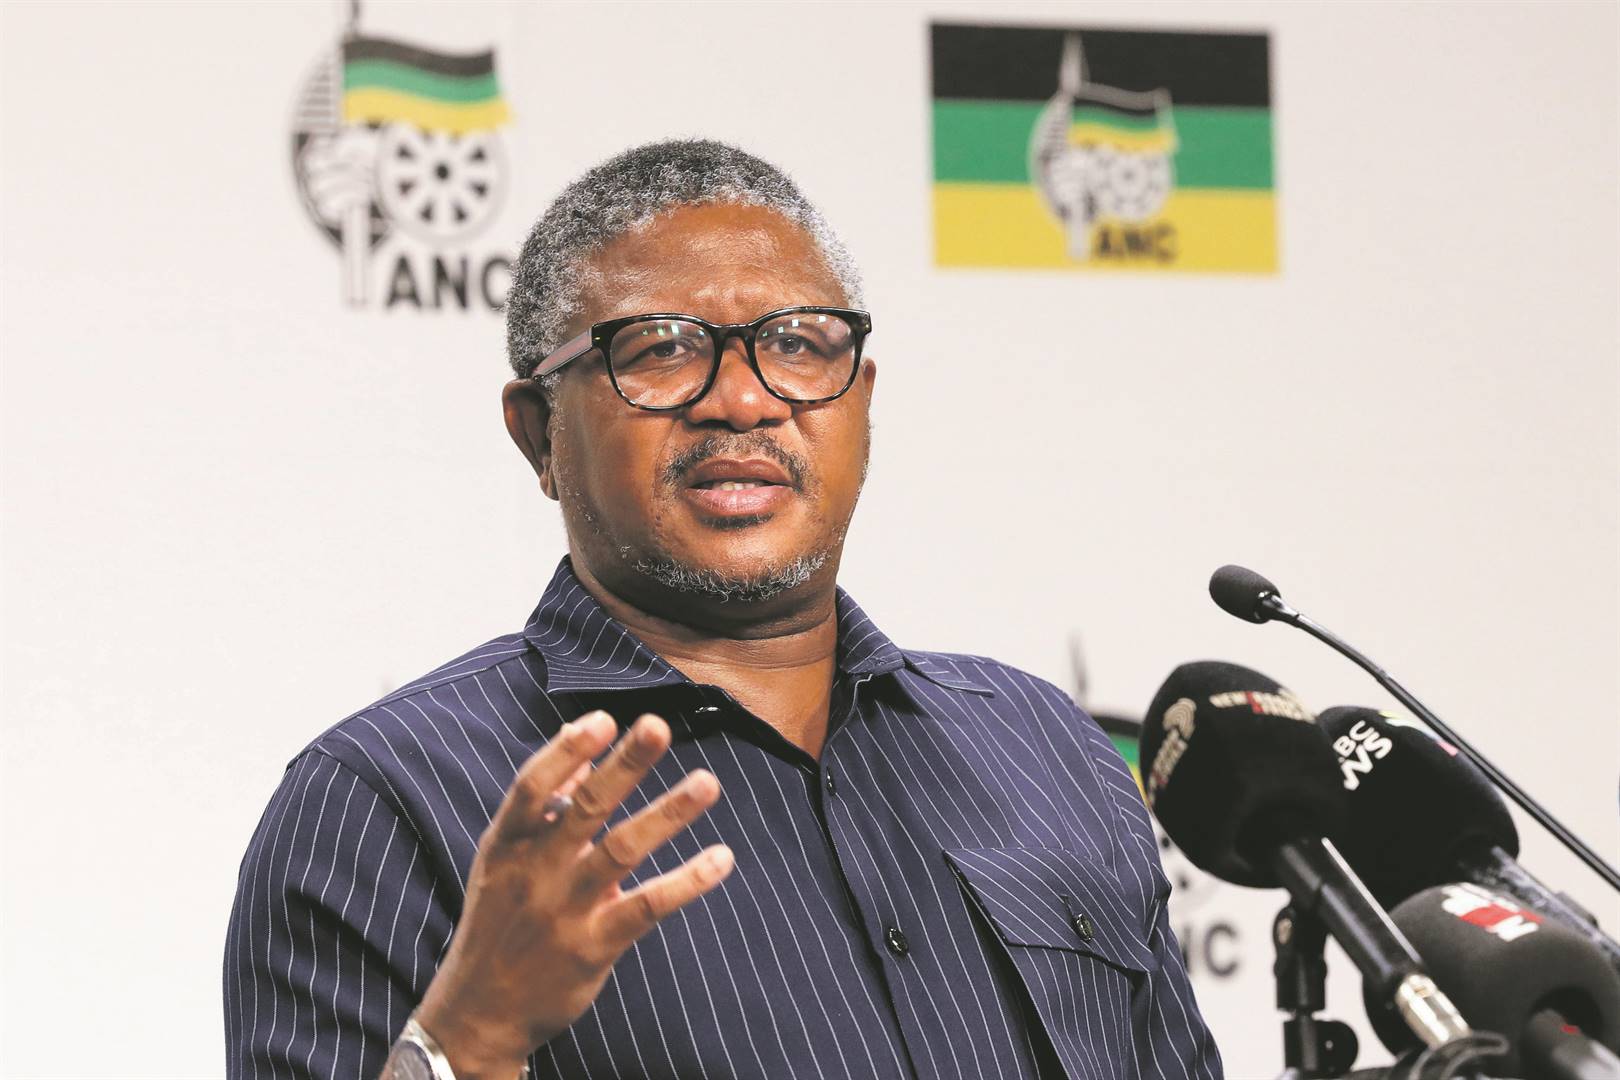 News24 | Senior ANC delegation jets off to Moscow to join fight against 'new manifestation of colonialism'